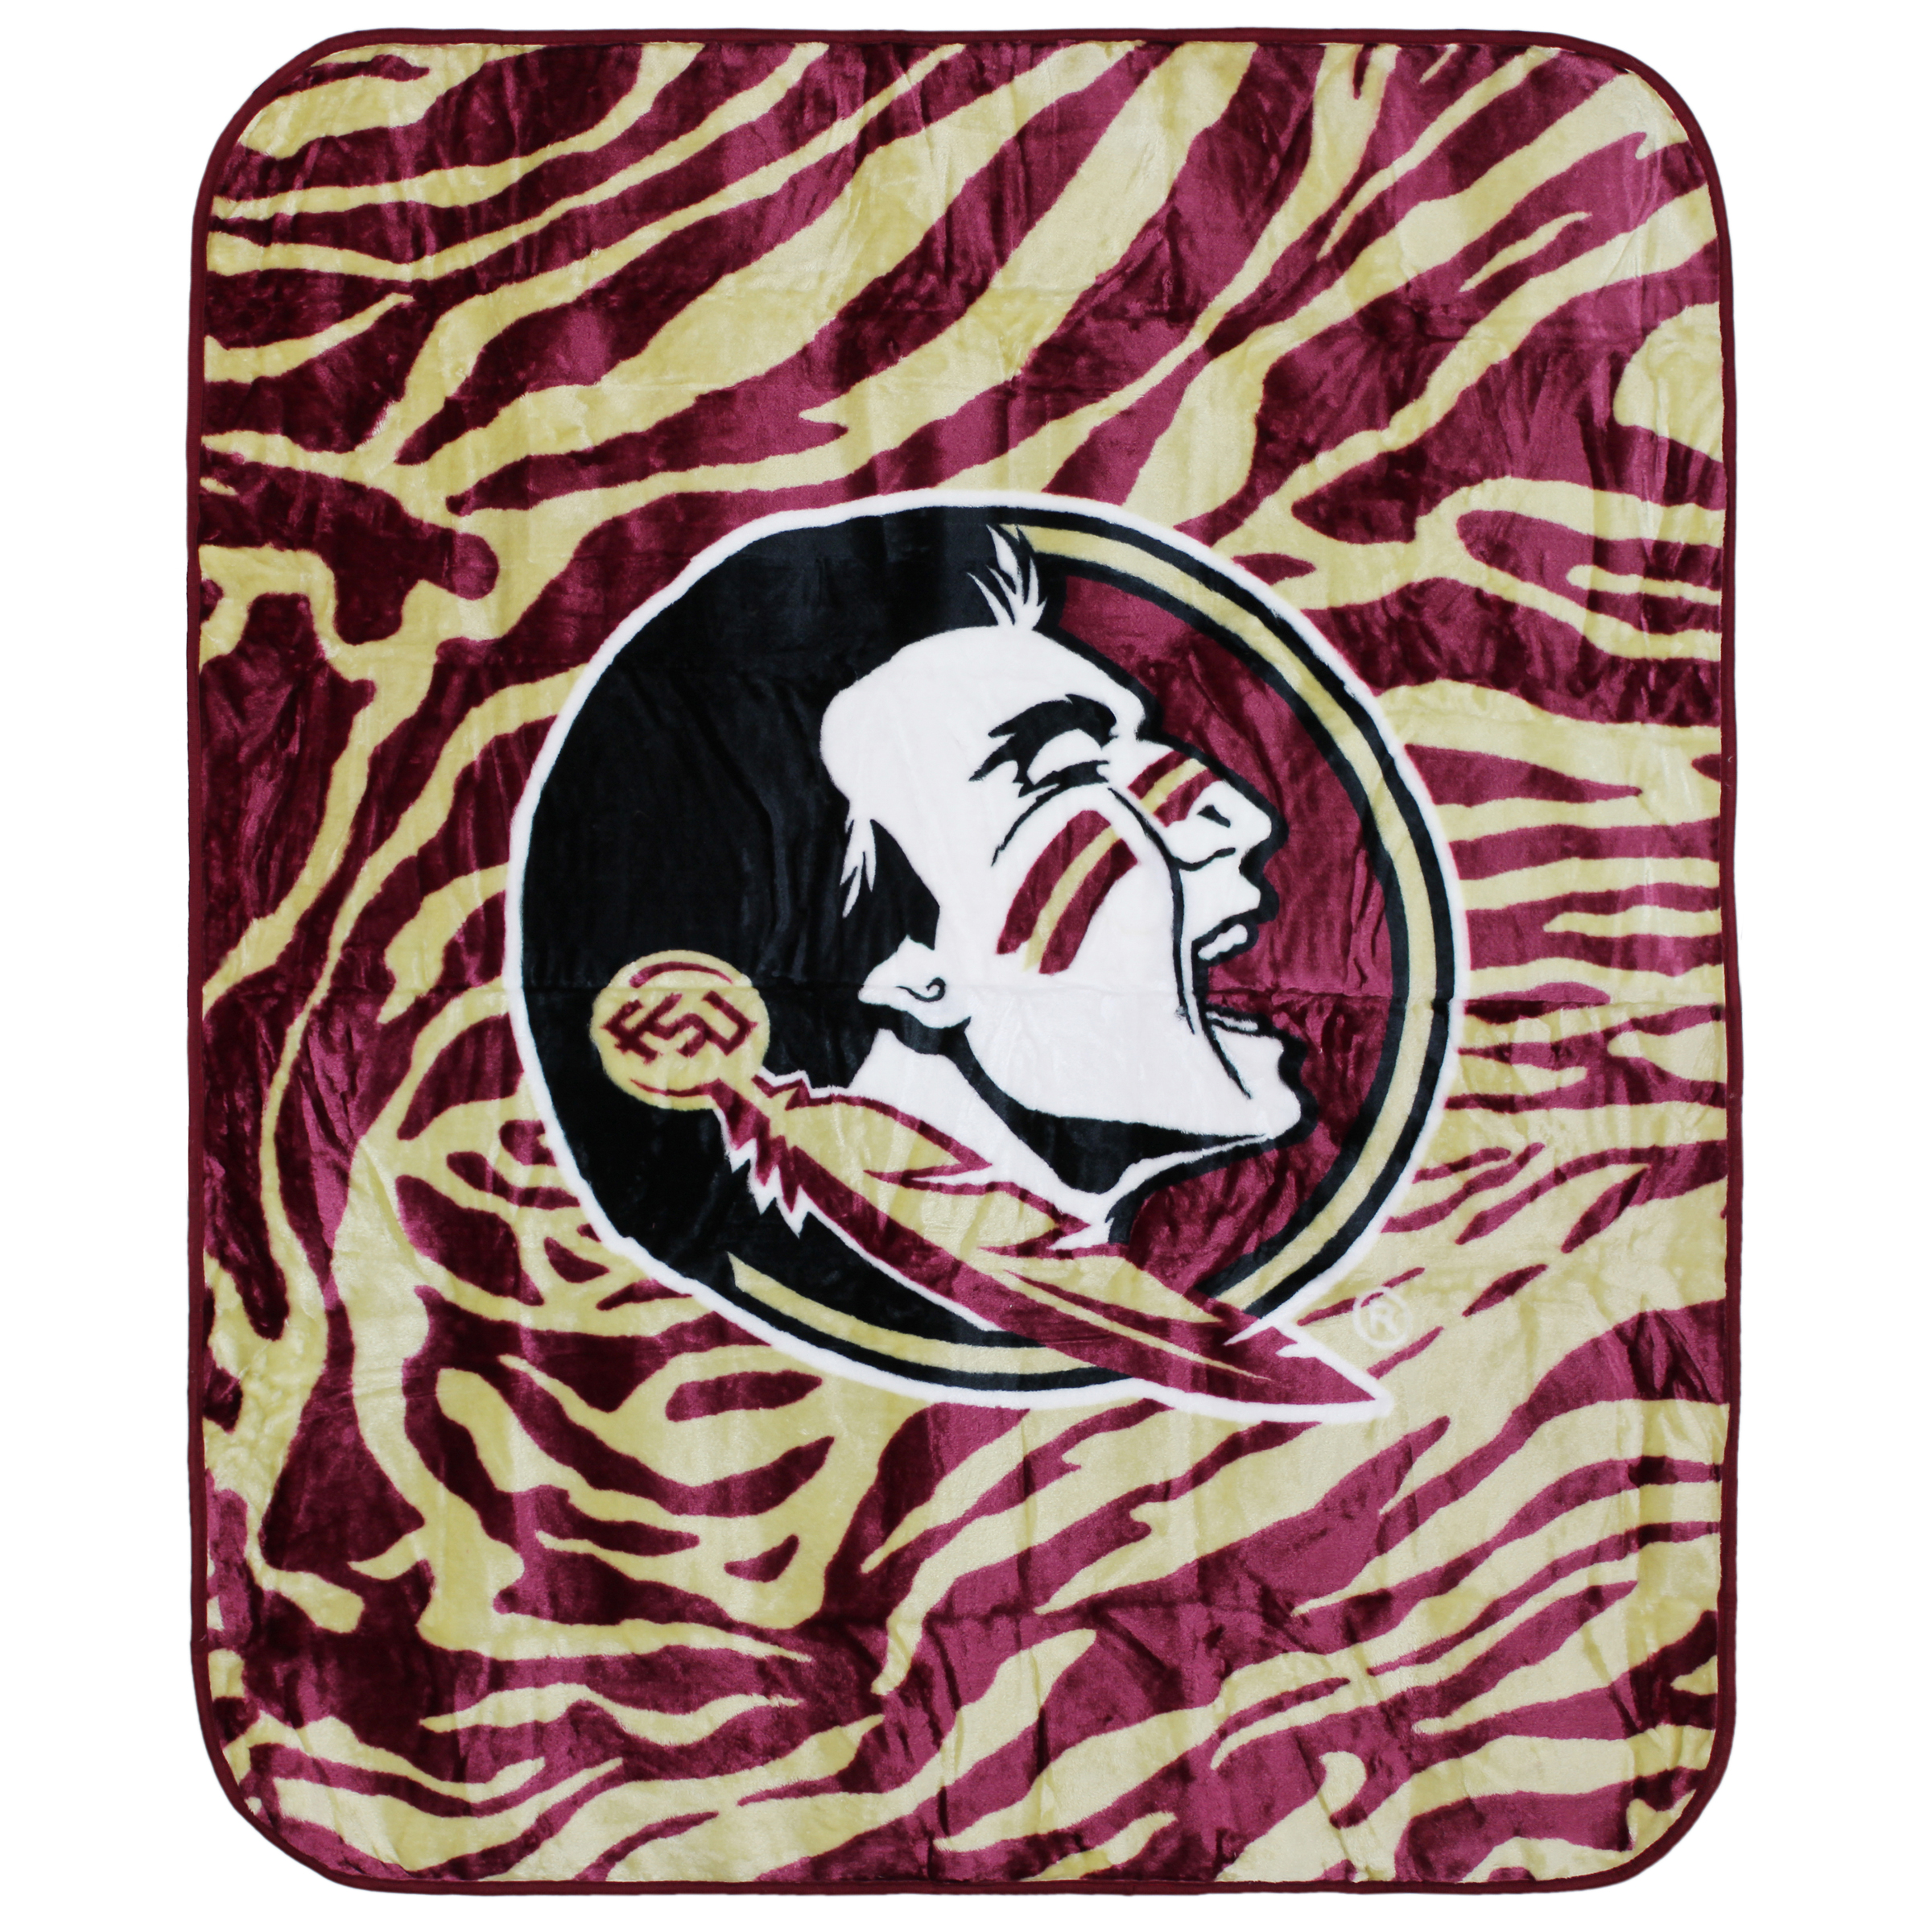 College Covers Everything Comfy Florida State Seminoles Soft Raschel Throw Blanket, 60" x 50" - image 1 of 8